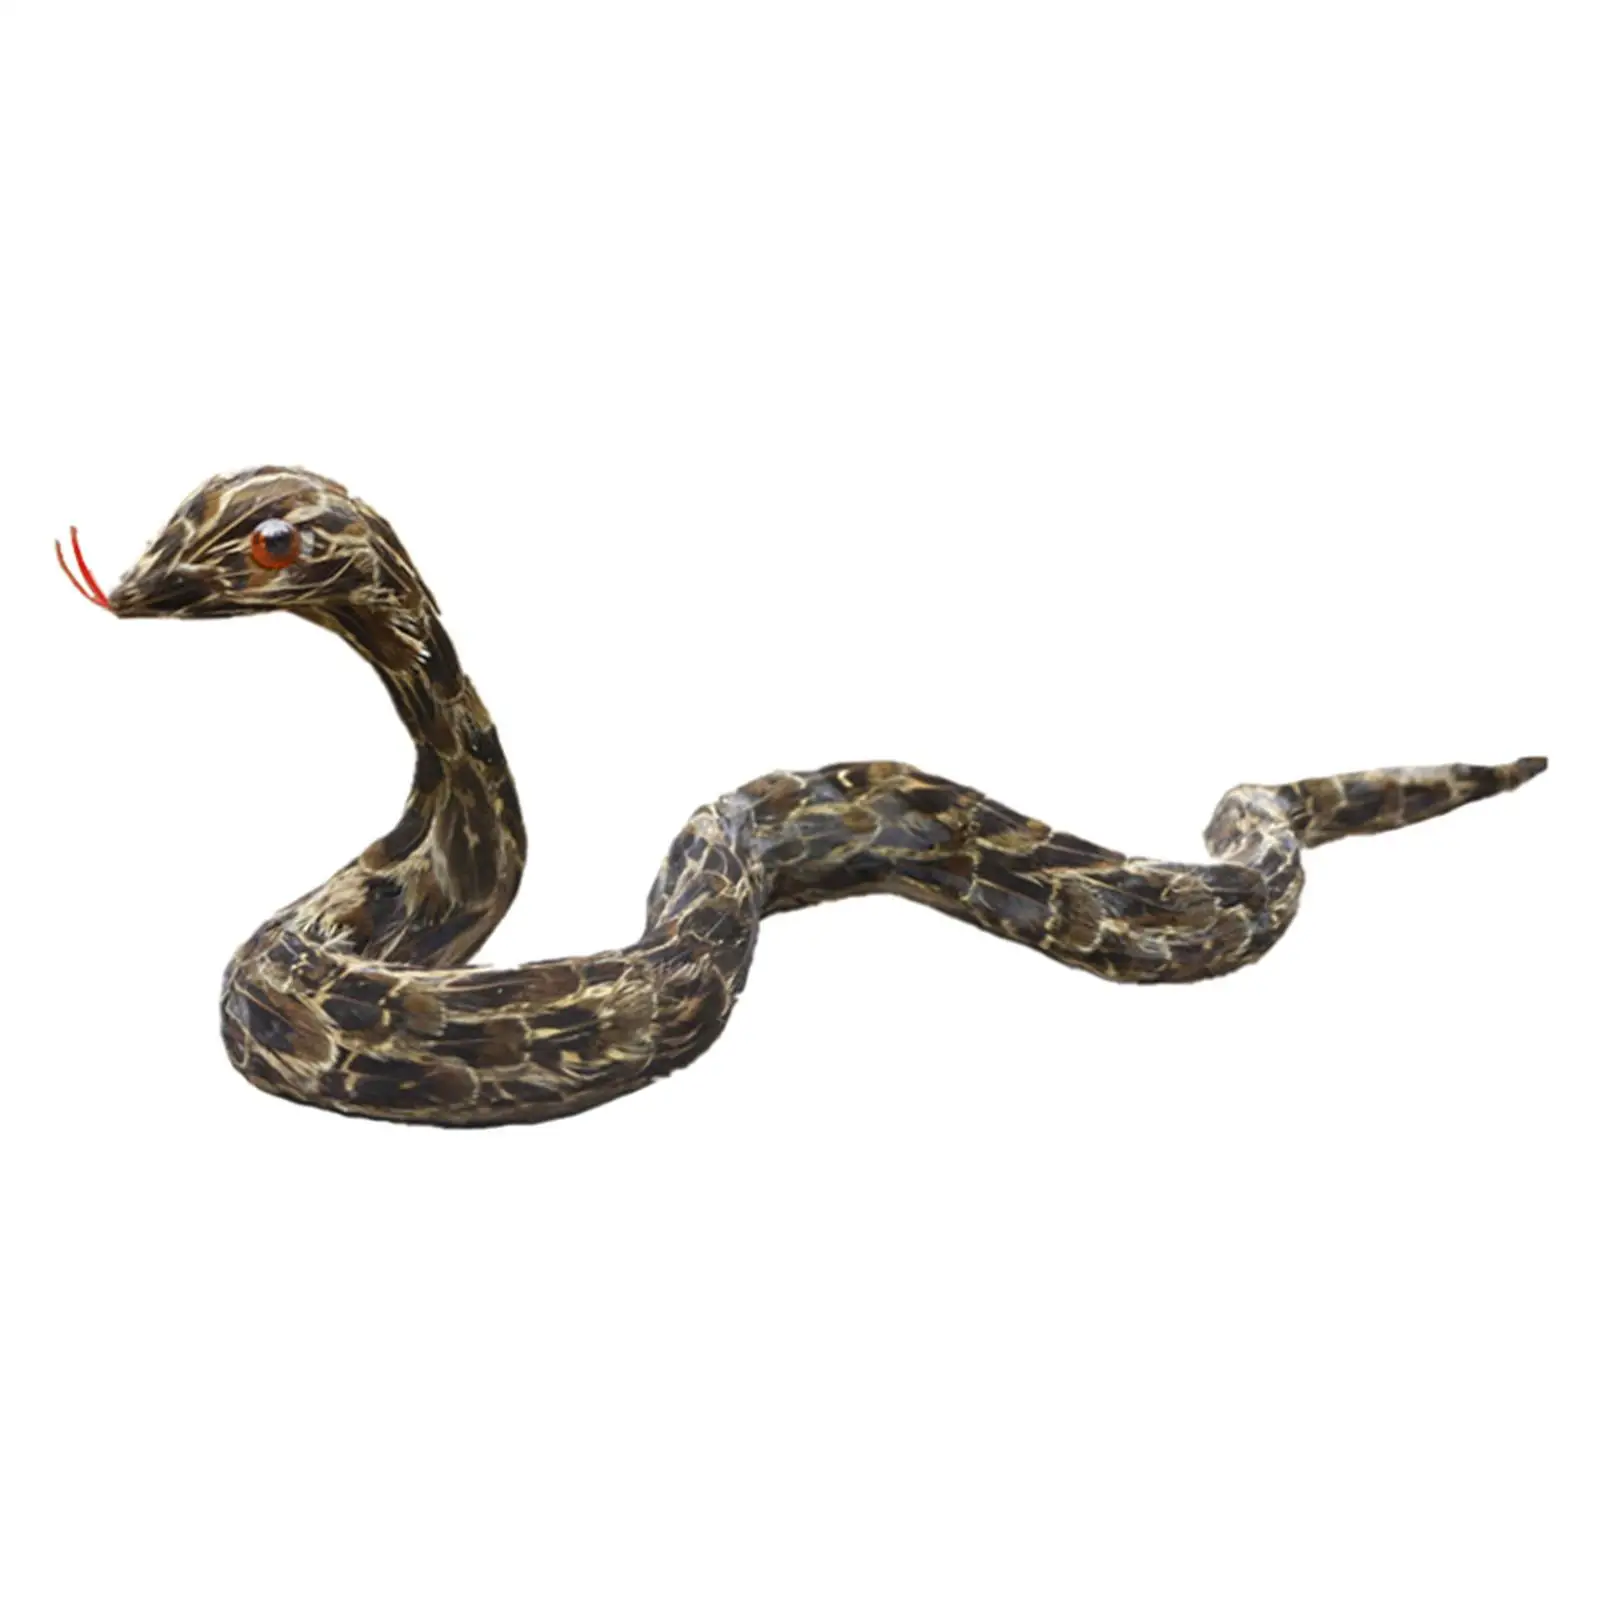 Simulation Snake Model Toy Practical Jokes Prop Party Favor Educational Toys